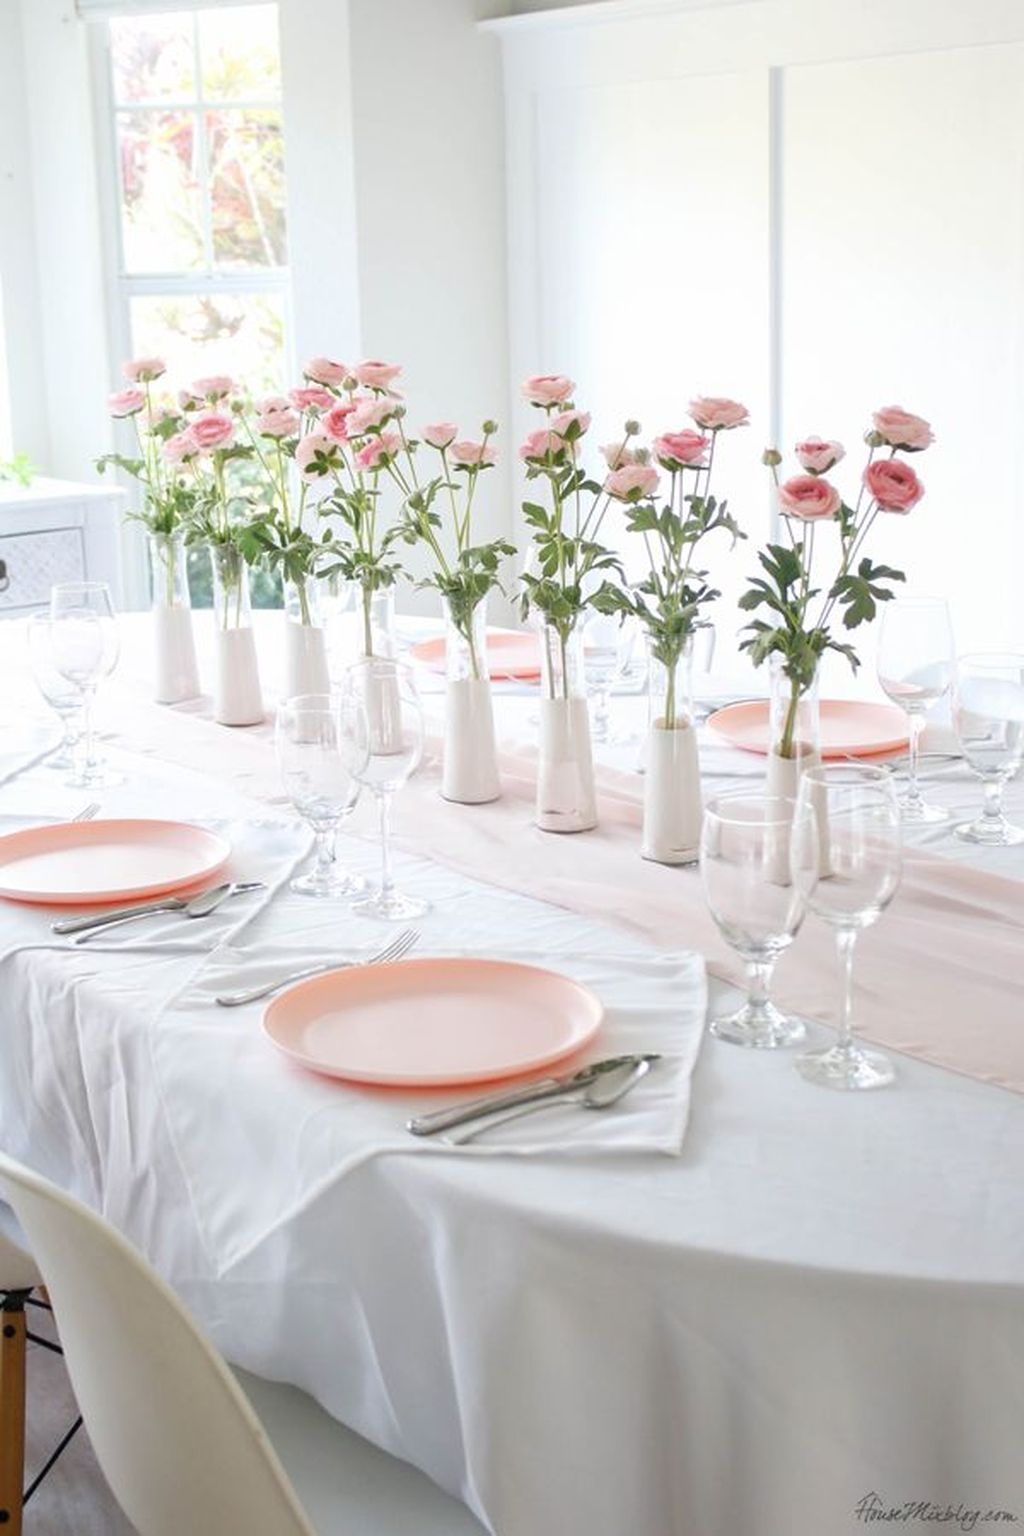 Perfect Valentine’s Day Romantic Dining Table Decor Ideas For Two People 22